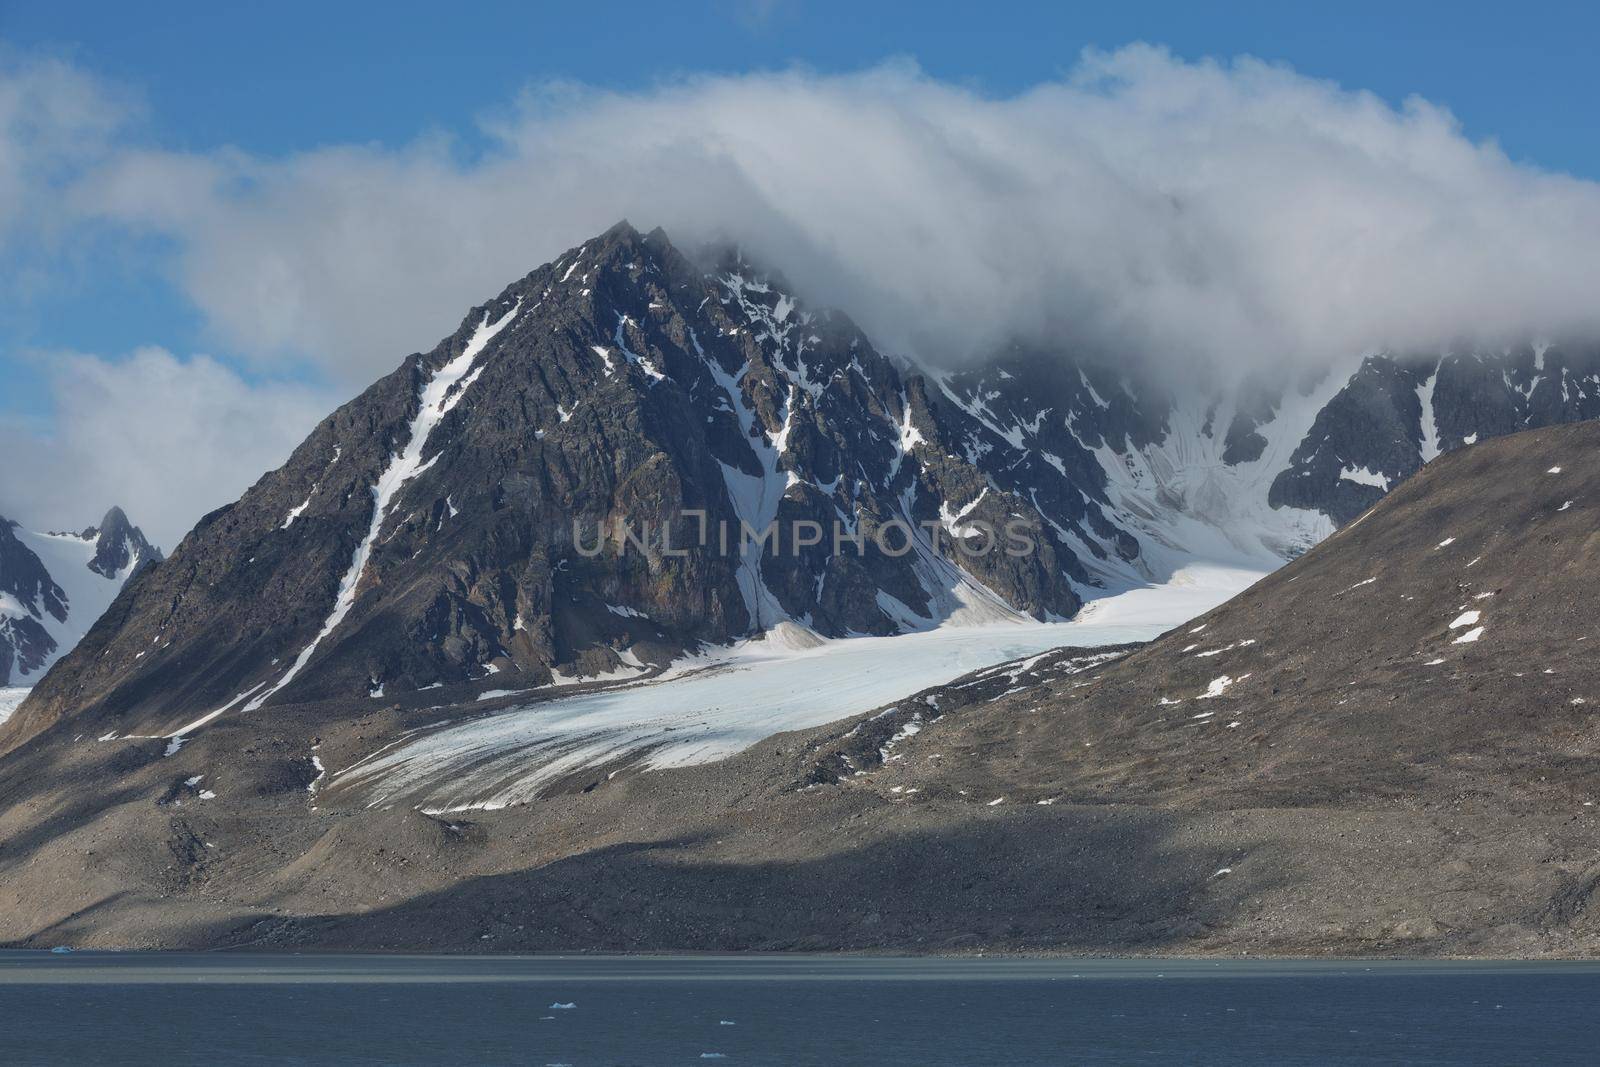 The coastline and mountains of Liefdefjord in the Svalbard Islands (Spitzbergen) in the high Arctic by wondry